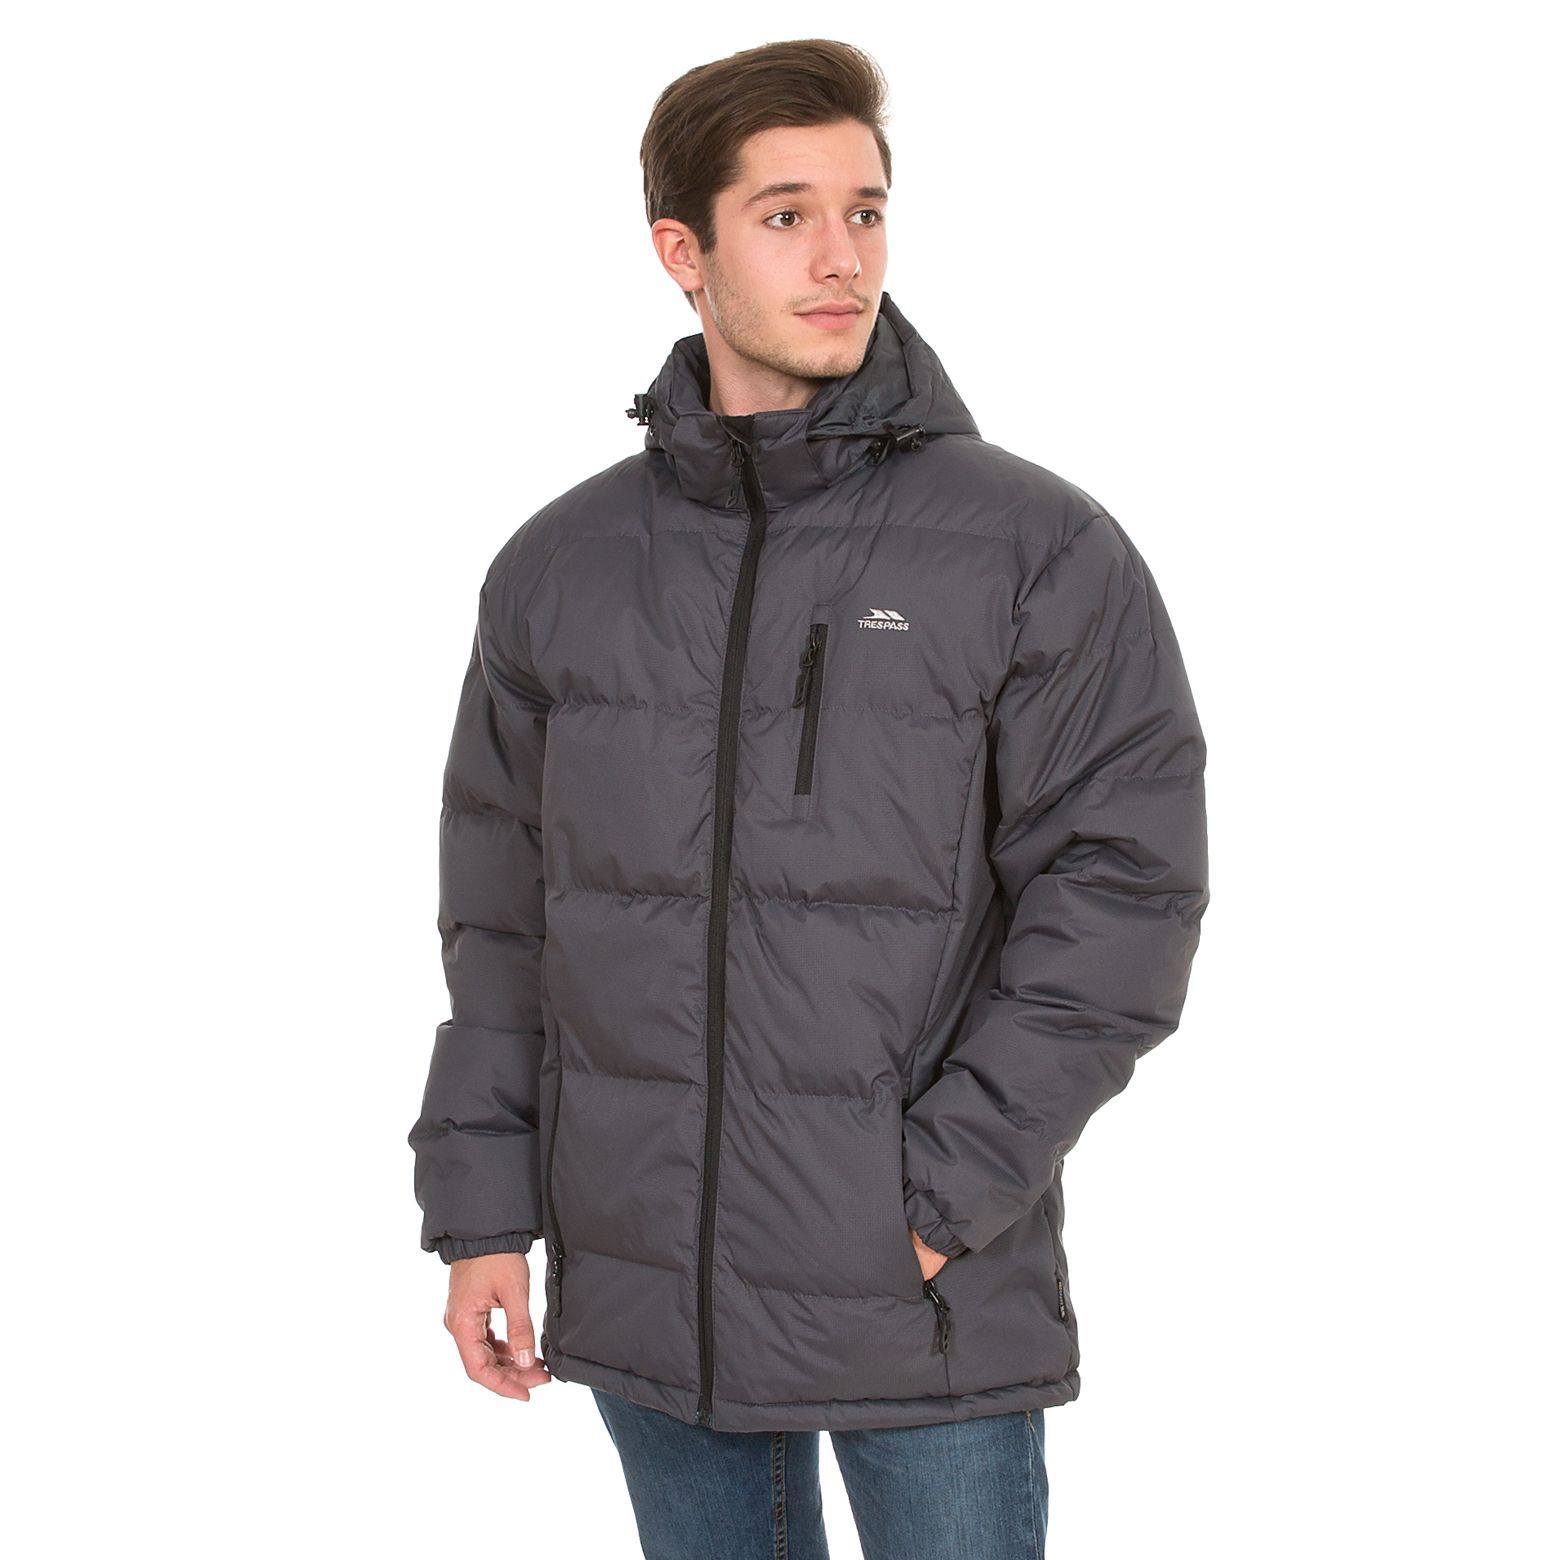 Padded jacket. Adjustable zip off hood. 3 Low profile zipped pockets. Low profile centre front zip. Elasticated cuffs. Down-style look with a polyester fill for great value. 100% Polyester.